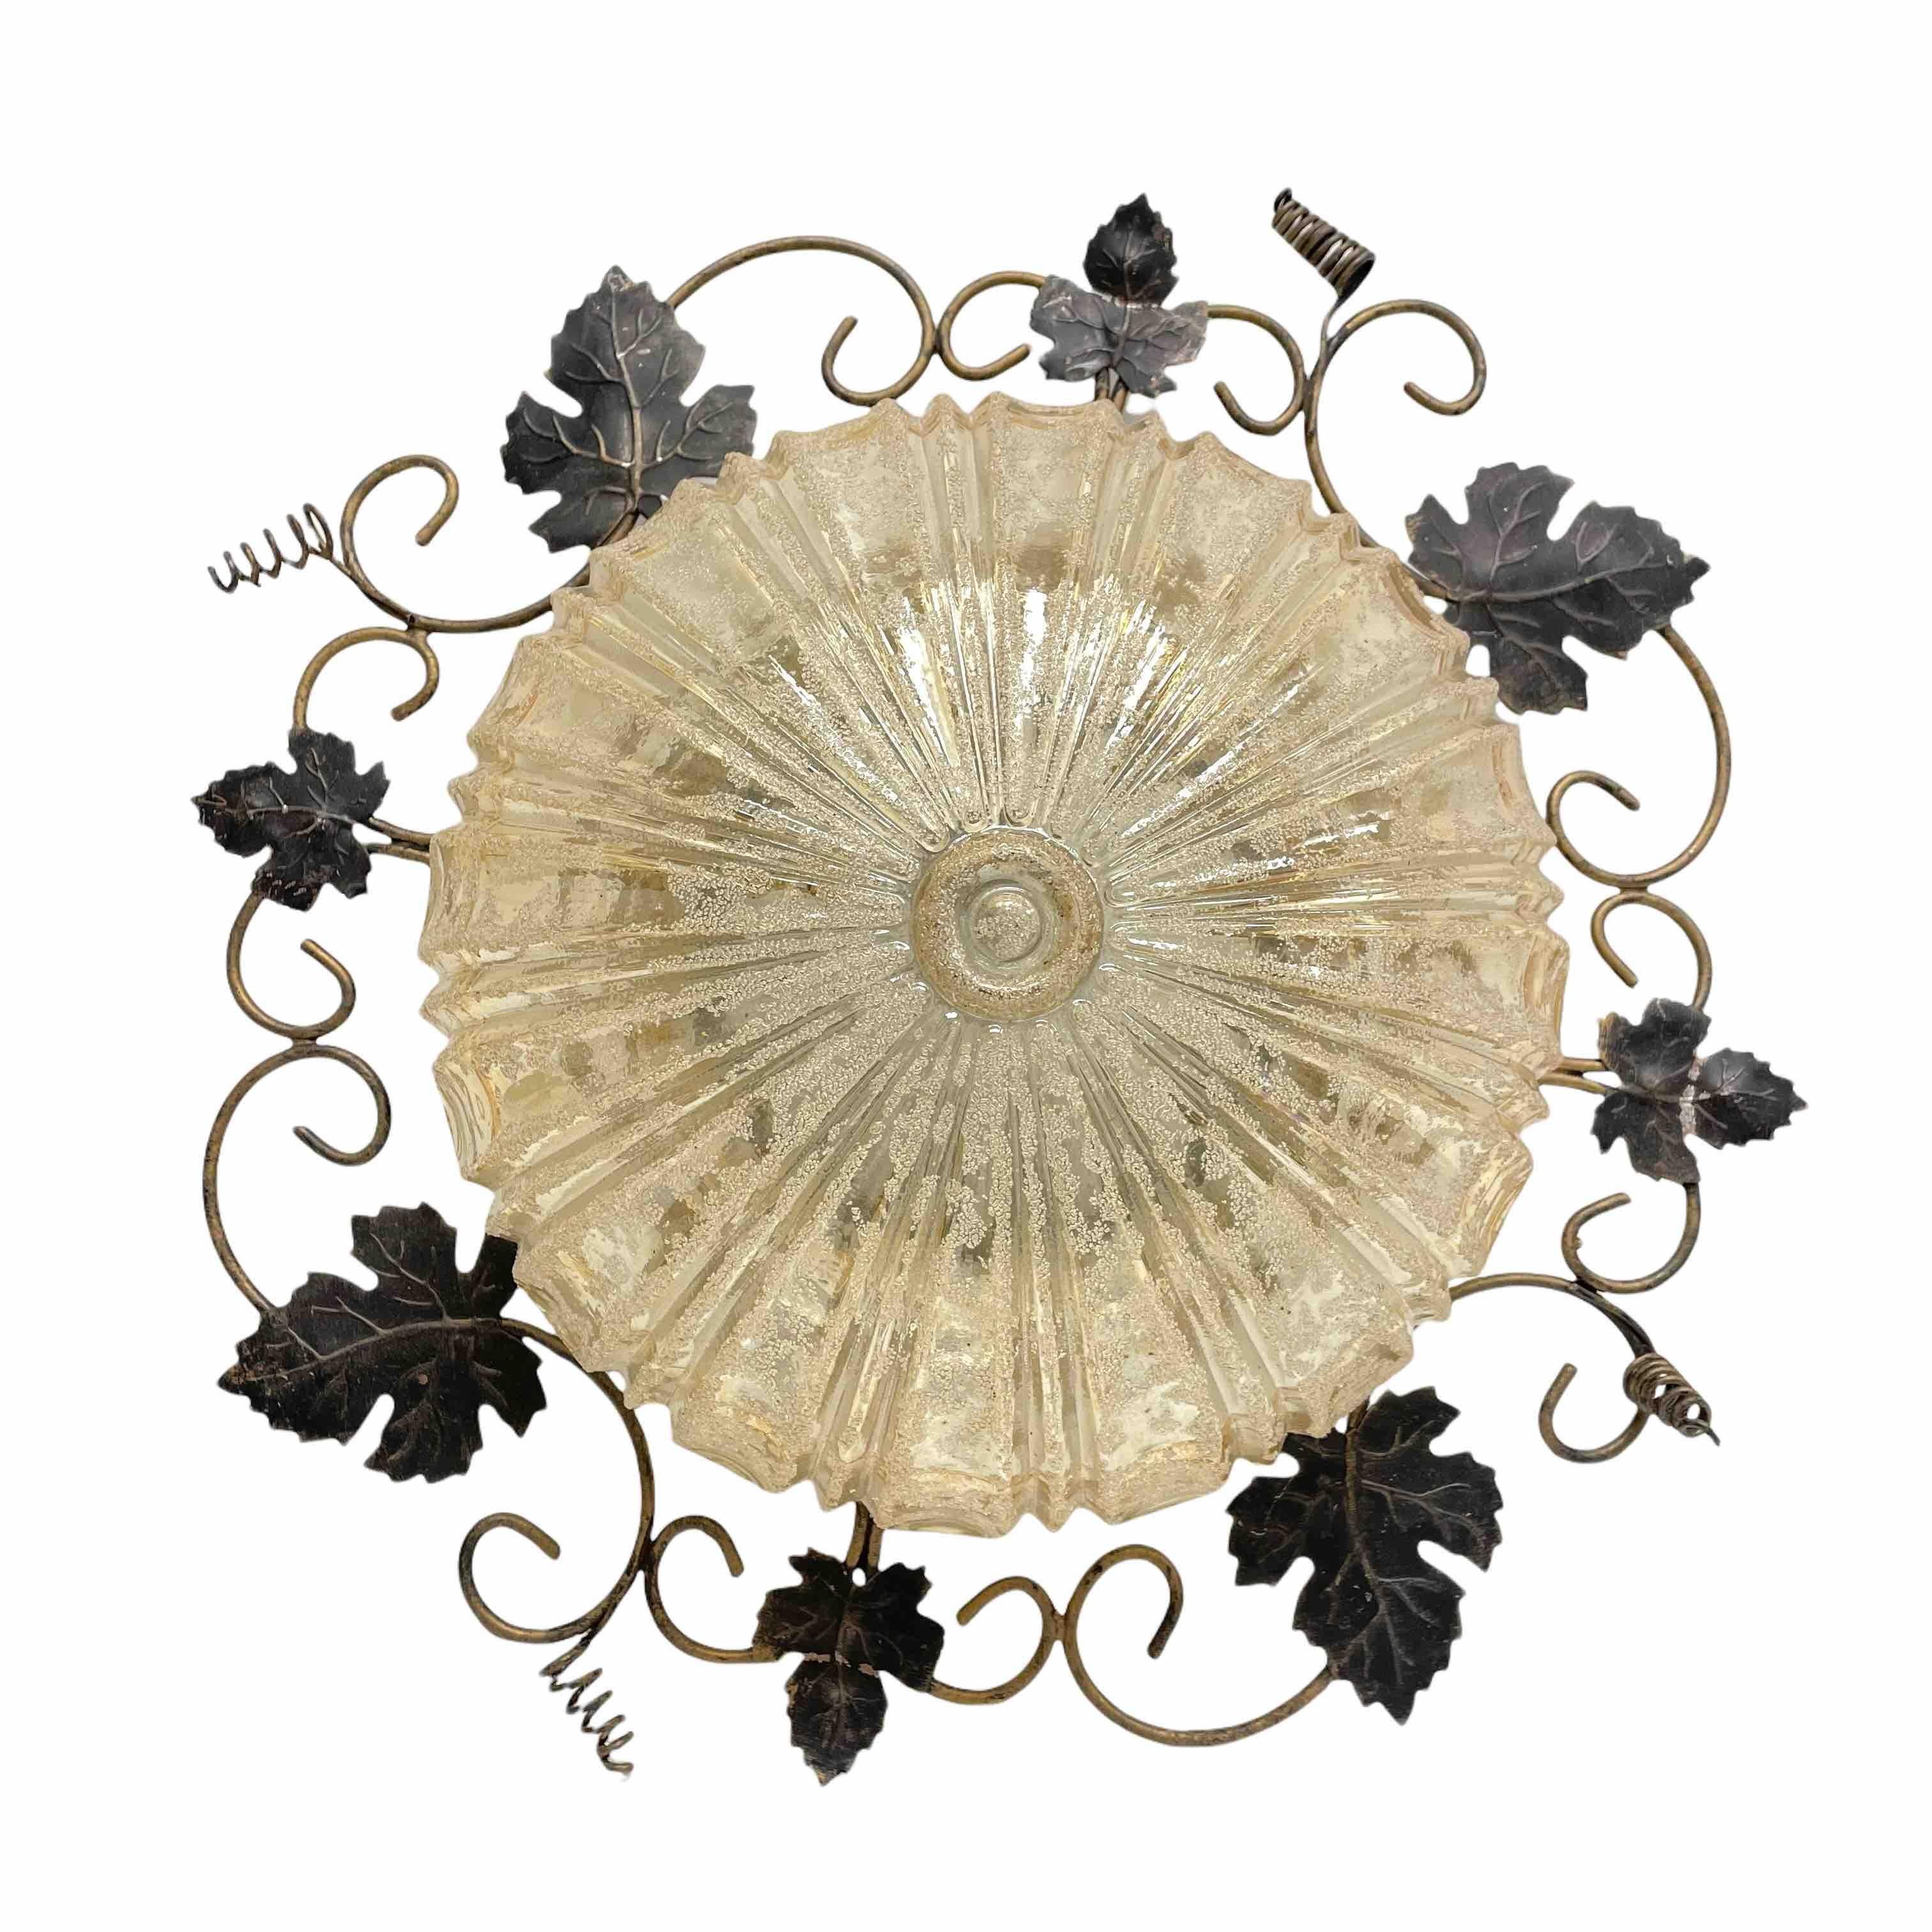 A beautiful flush mount made of wrought iron with an amber colored glass. Gorgeous textured amber colored glass flush mount with metal fixture. The fixture requires one European E27 Edison or medium bulb up to 60 watts. A nice addition to any room